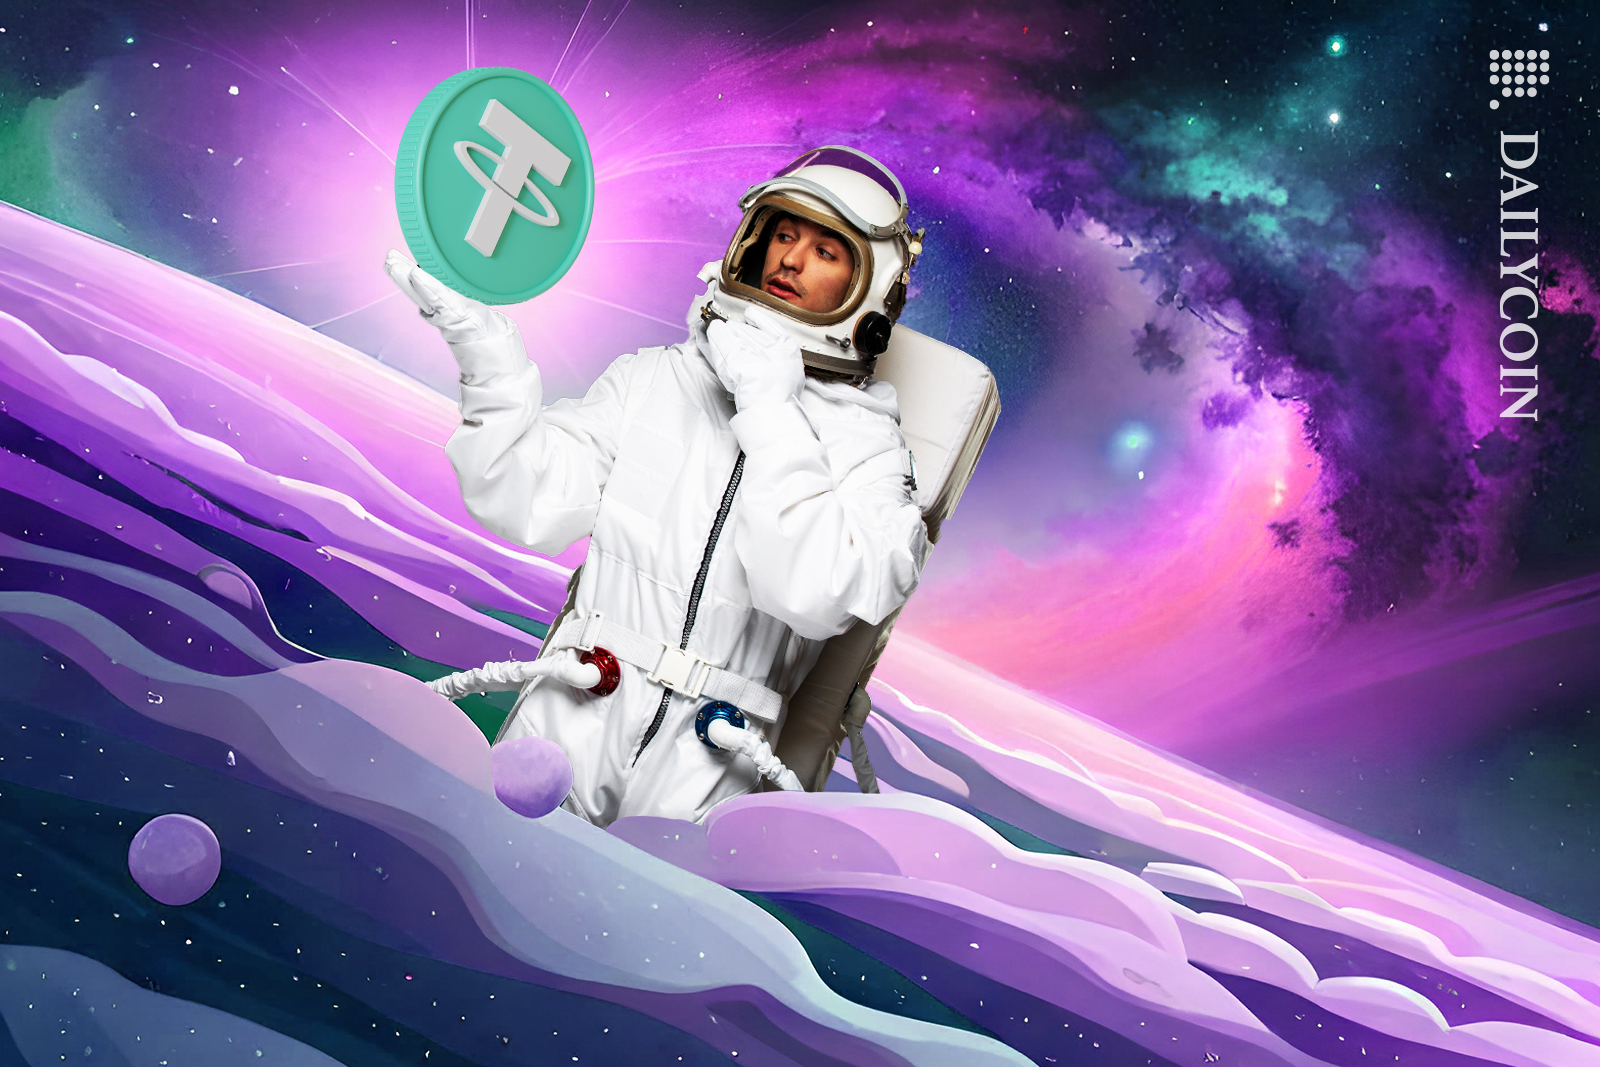 Spaceman appearing from the clouds in space with a Tether coin.